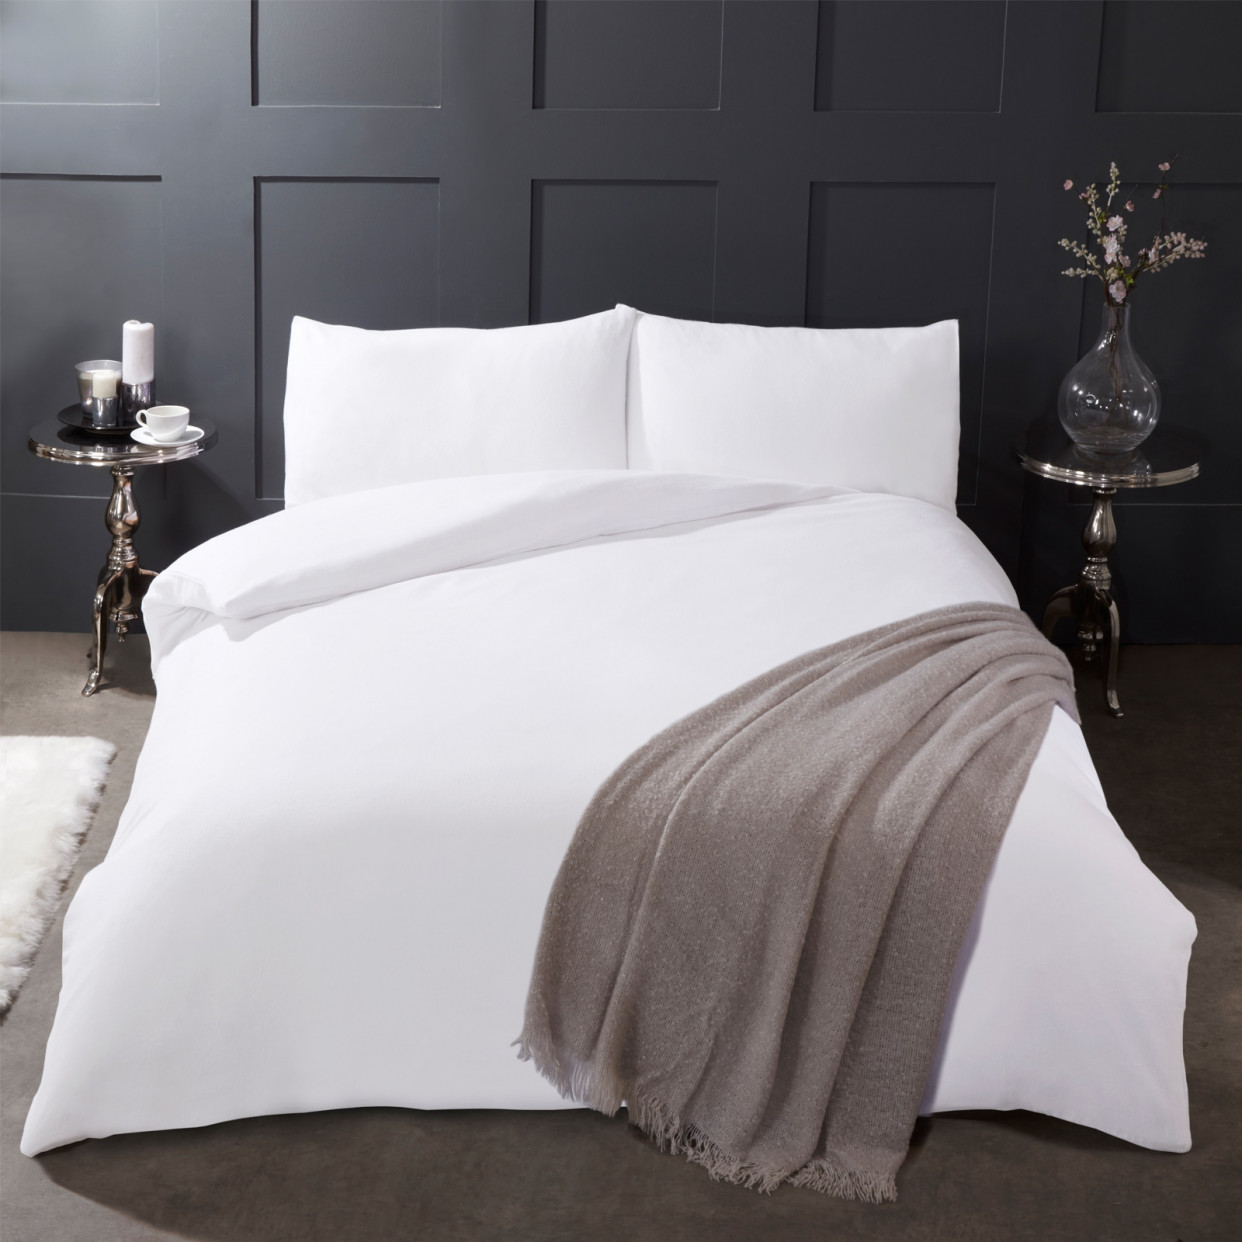 Highams 100% Brushed Cotton Duvet Cover with Pillowcase Plain Flannelette Thermal Bedding Set, Pure White - Single>